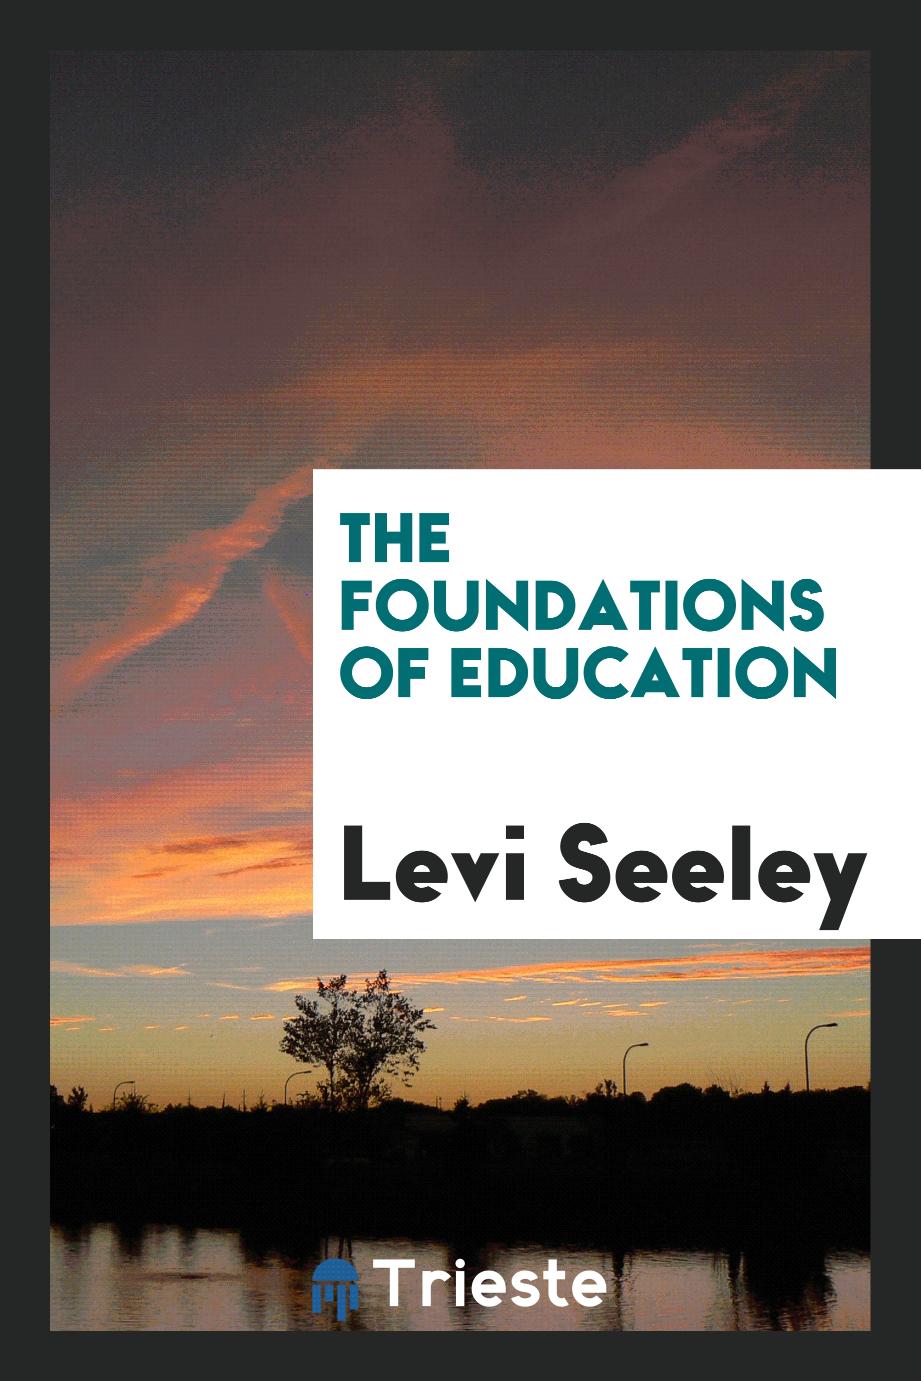 The foundations of education